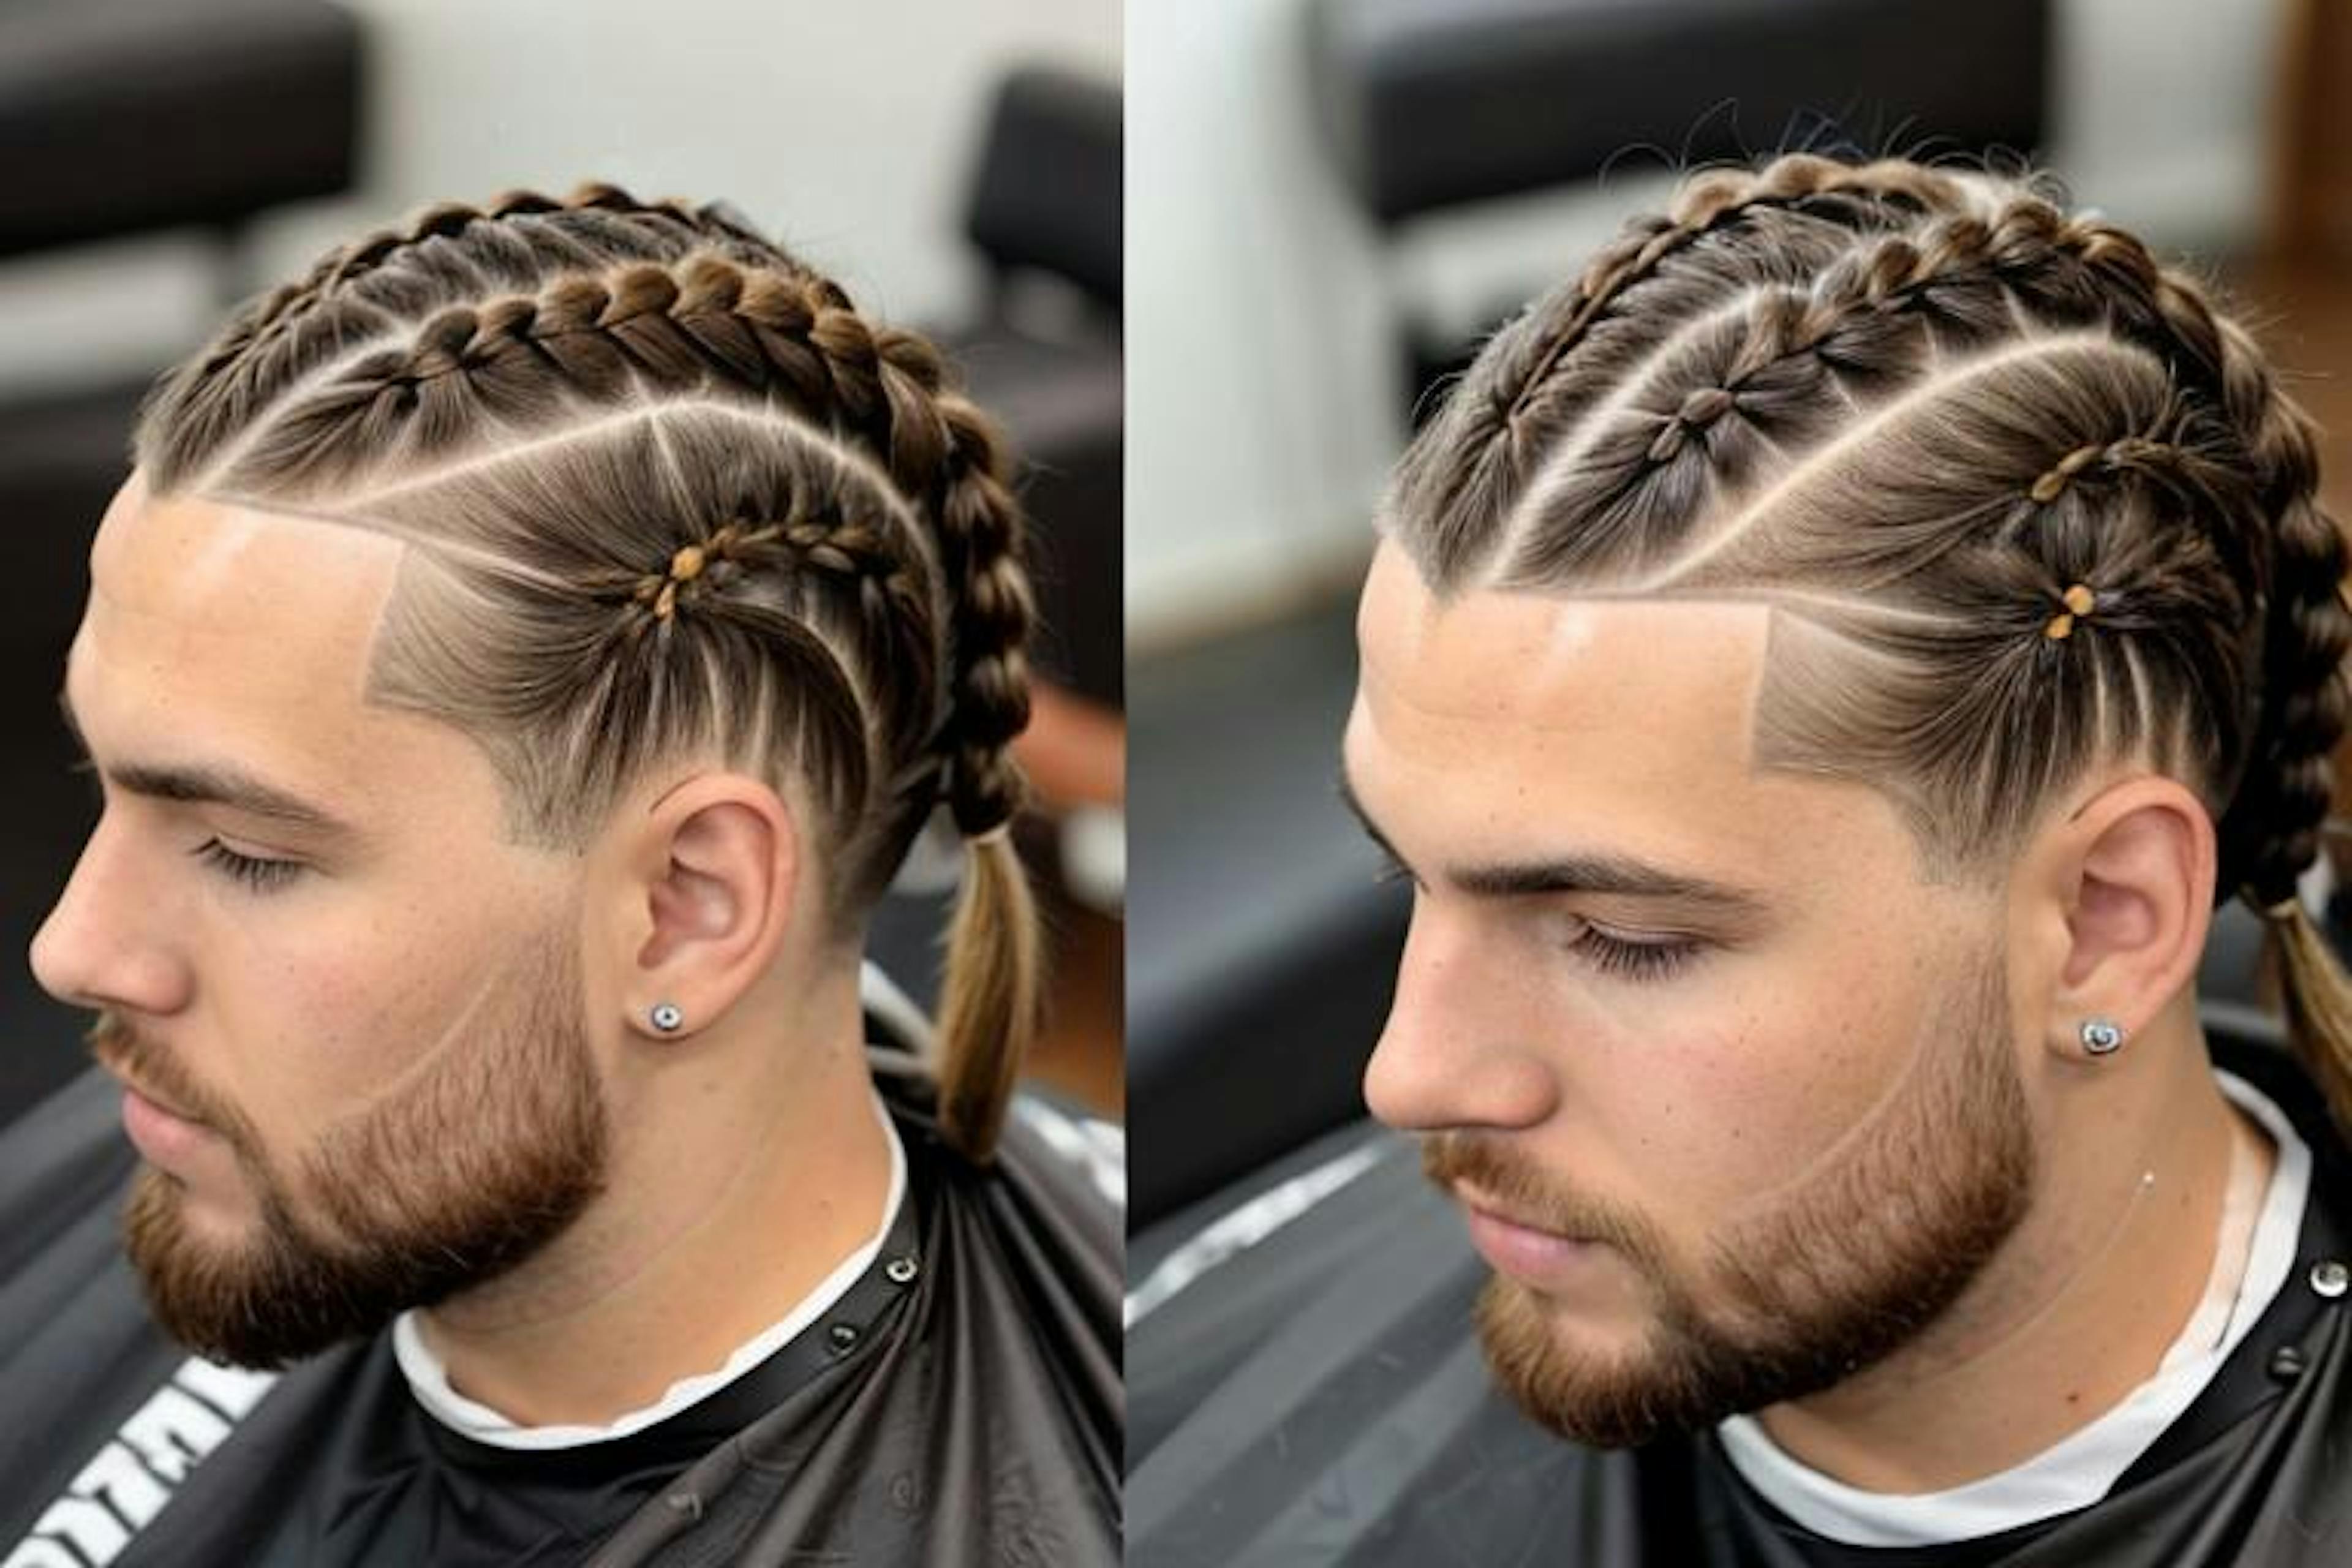 Two angles of a man with braided hair